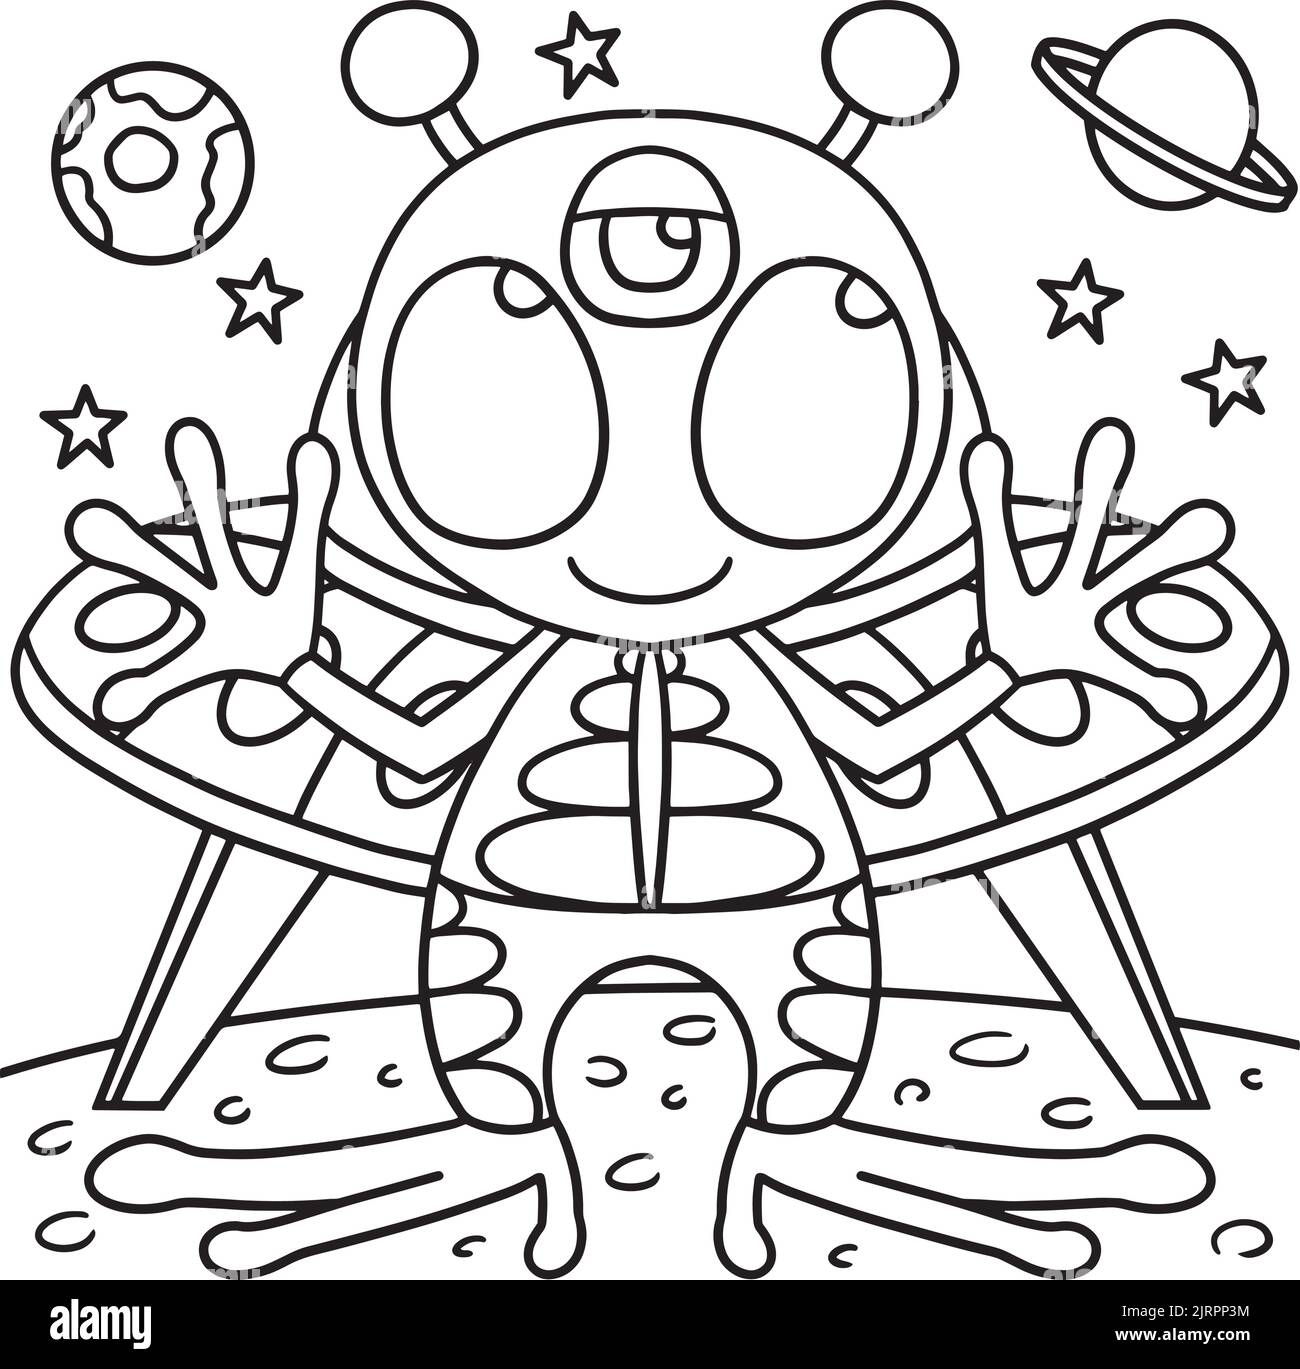 UFO Alien Space Coloring Page for Kids Stock Vector